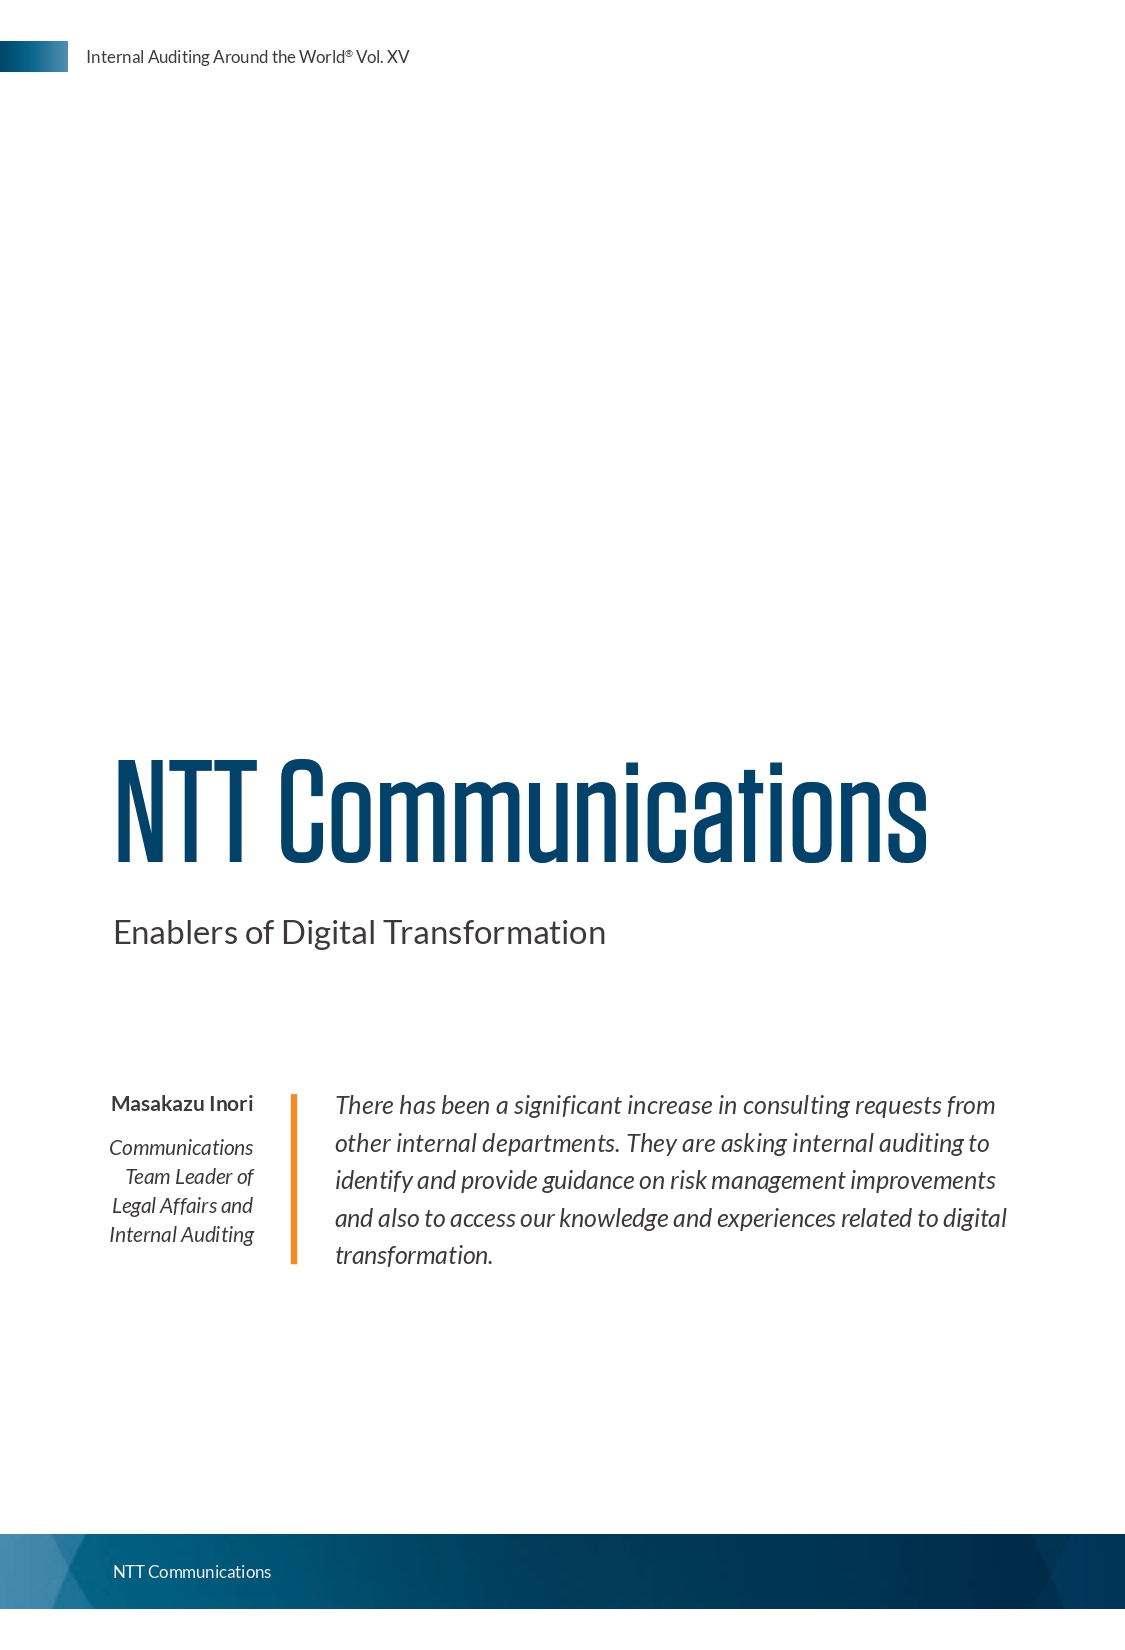 Screenshot of the first page of NTT Communications Enablers of Digital Transformation